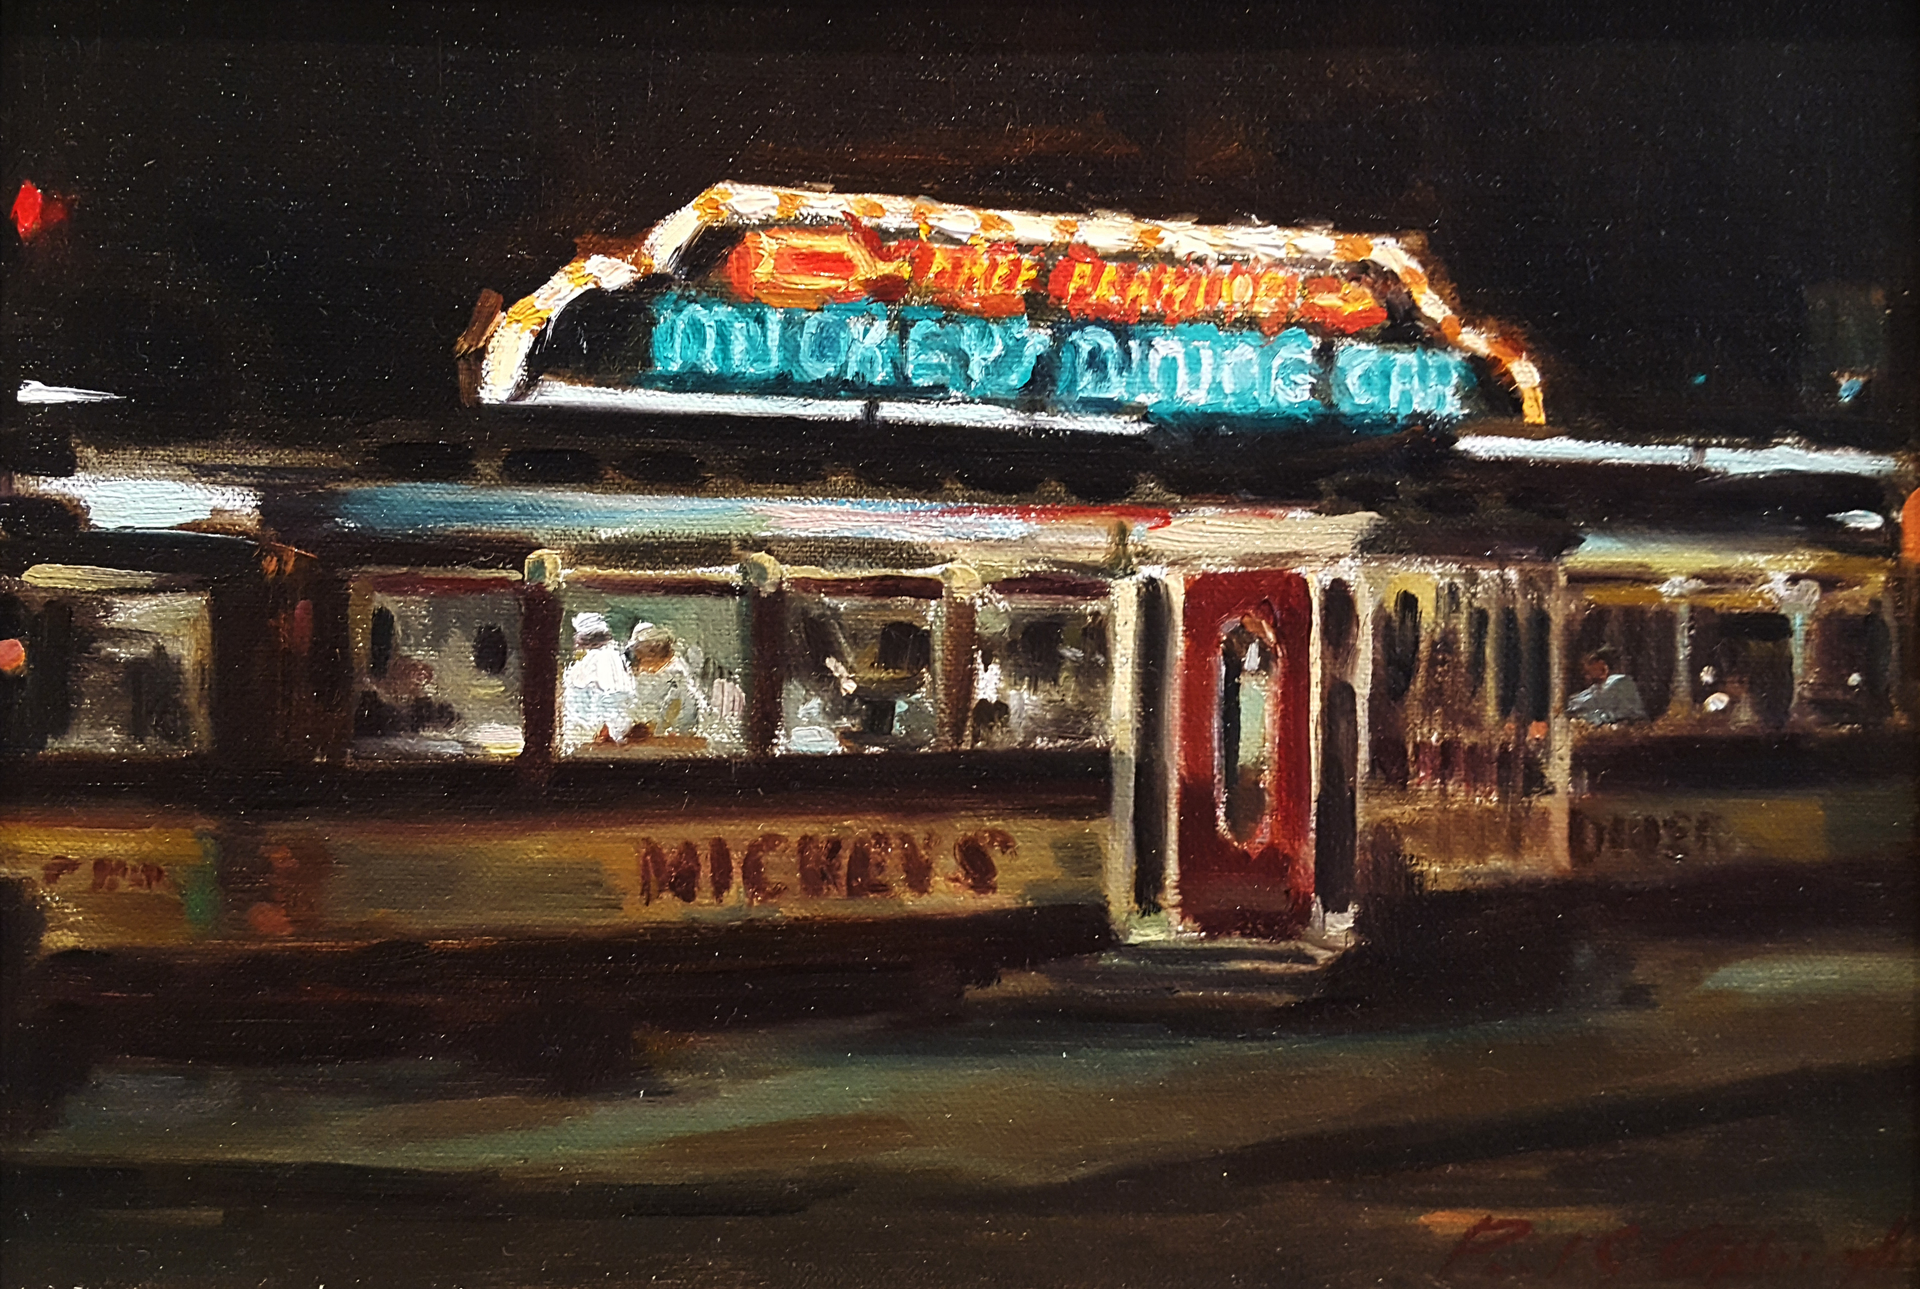 Mickey's Diner by Paul G. Oxborough